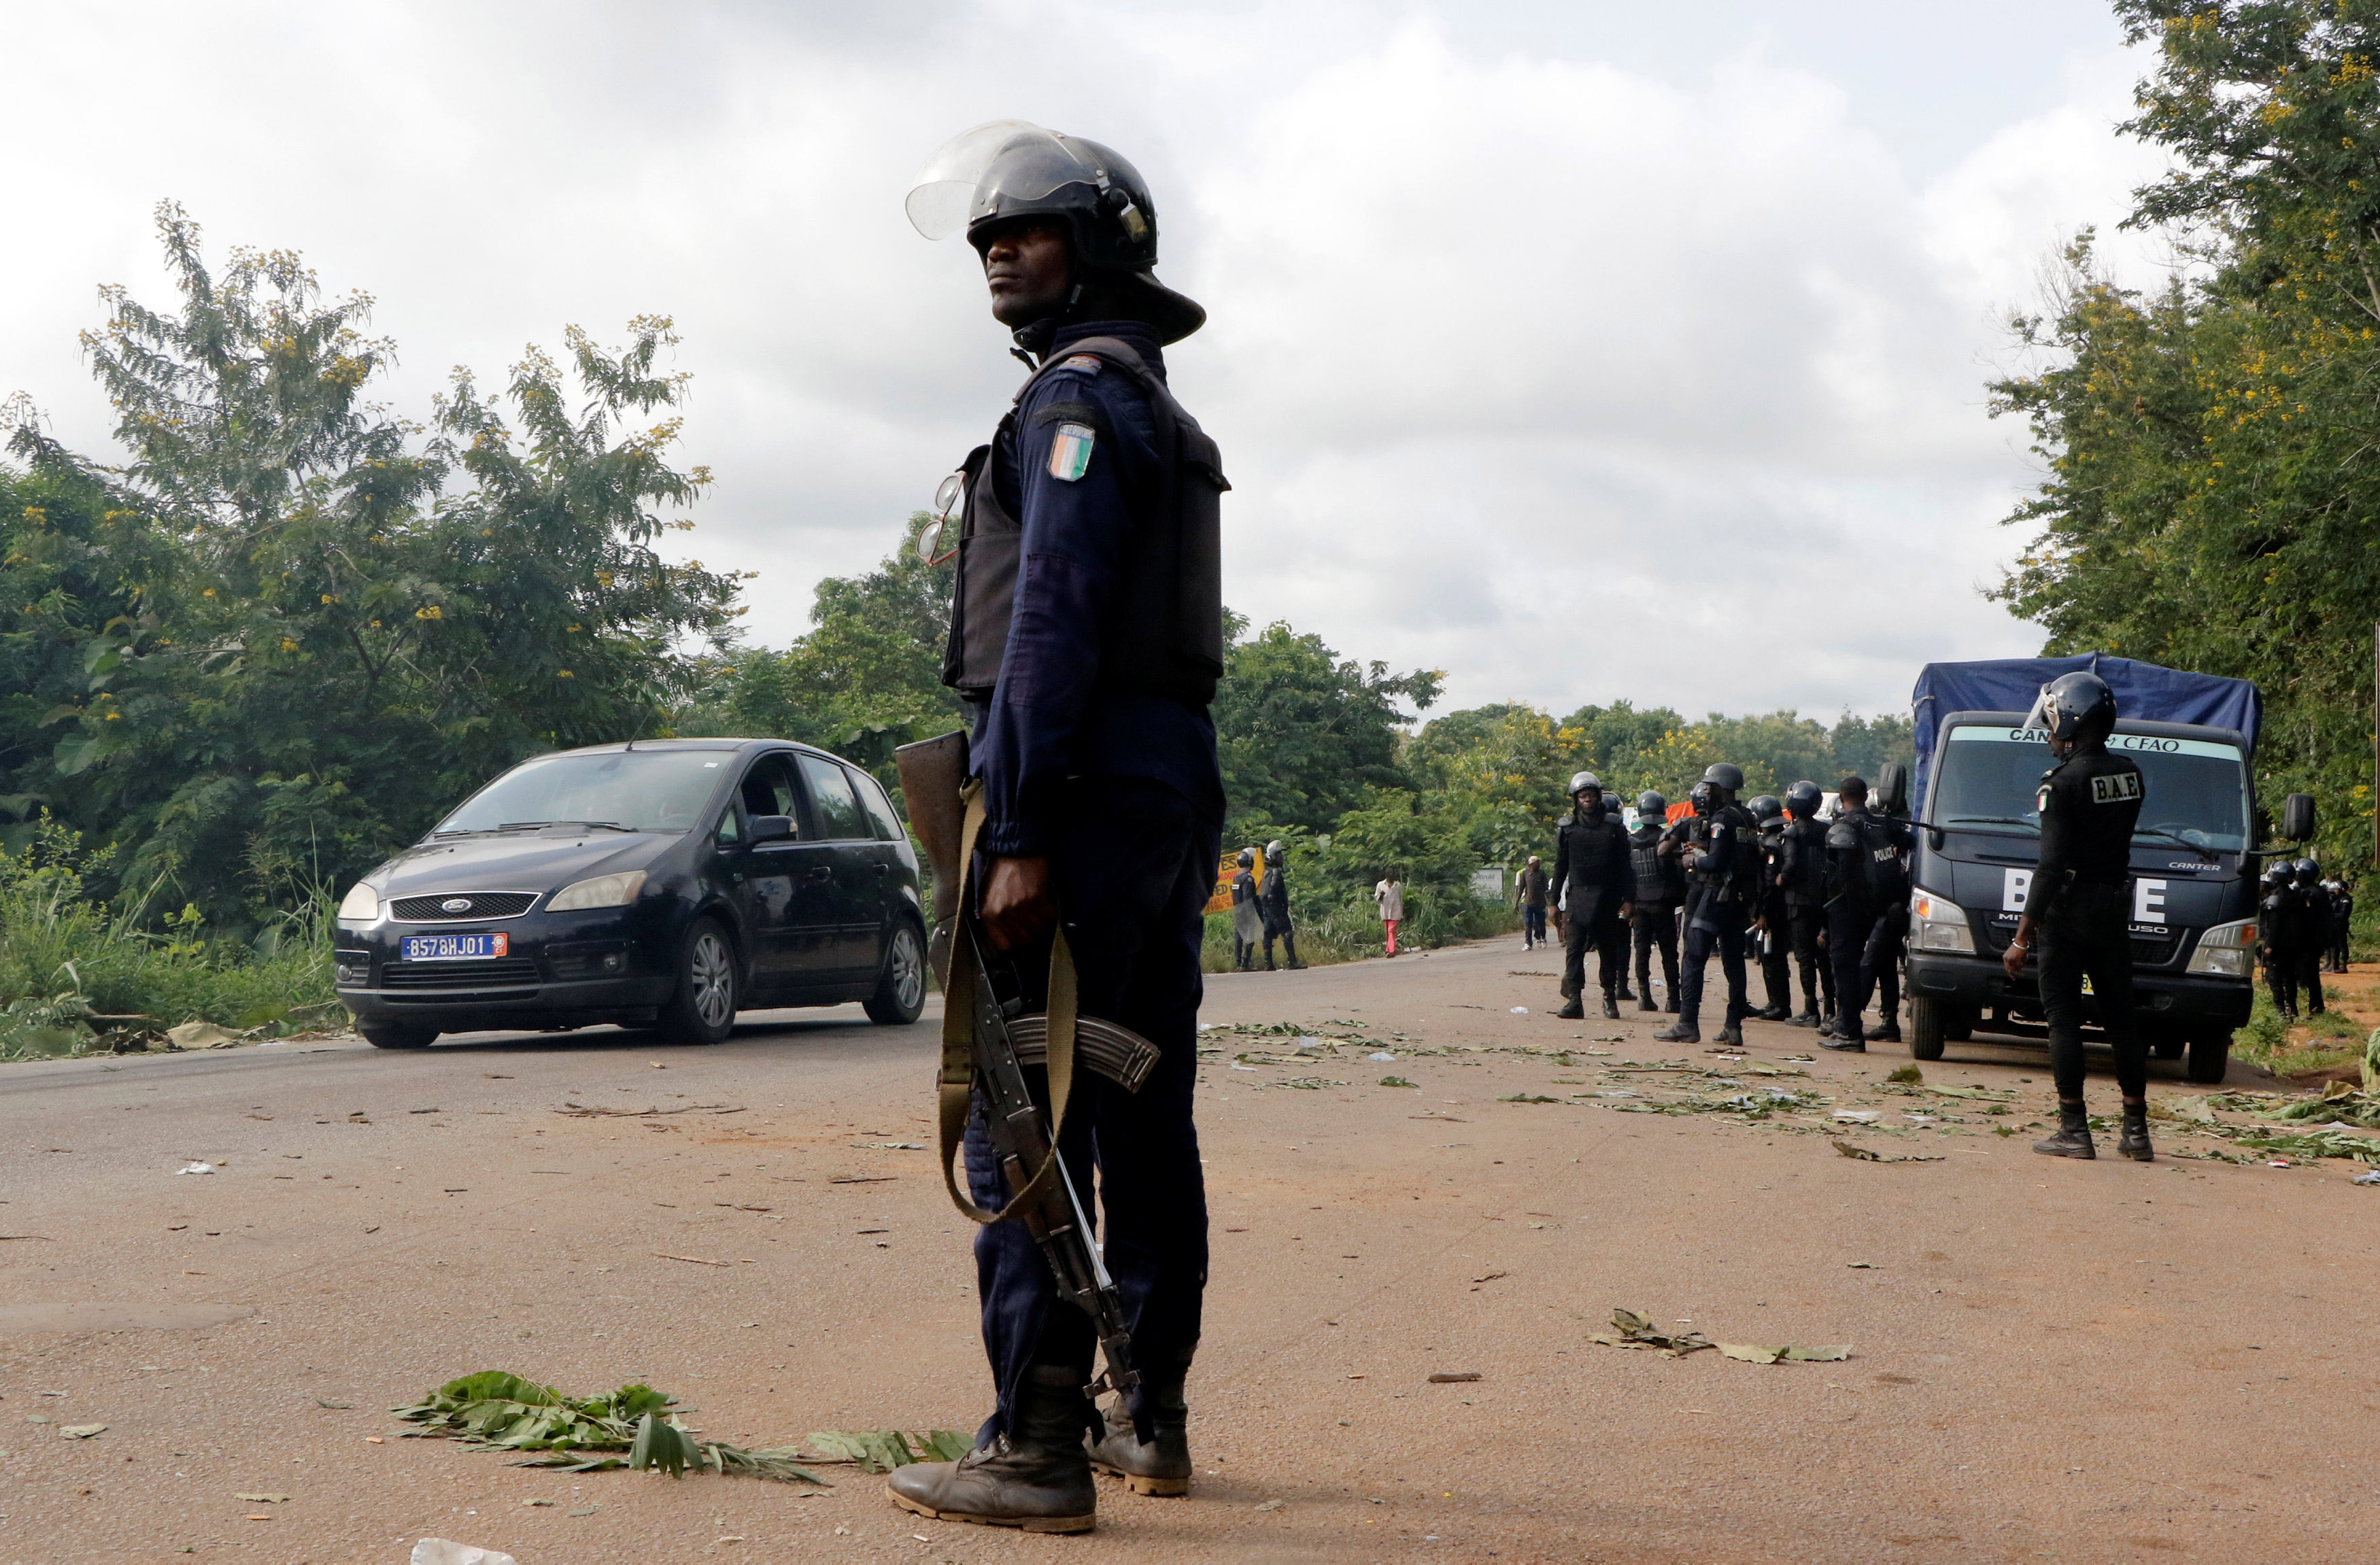 Three dead in clashes between police and ex-rebels in Ivory coast